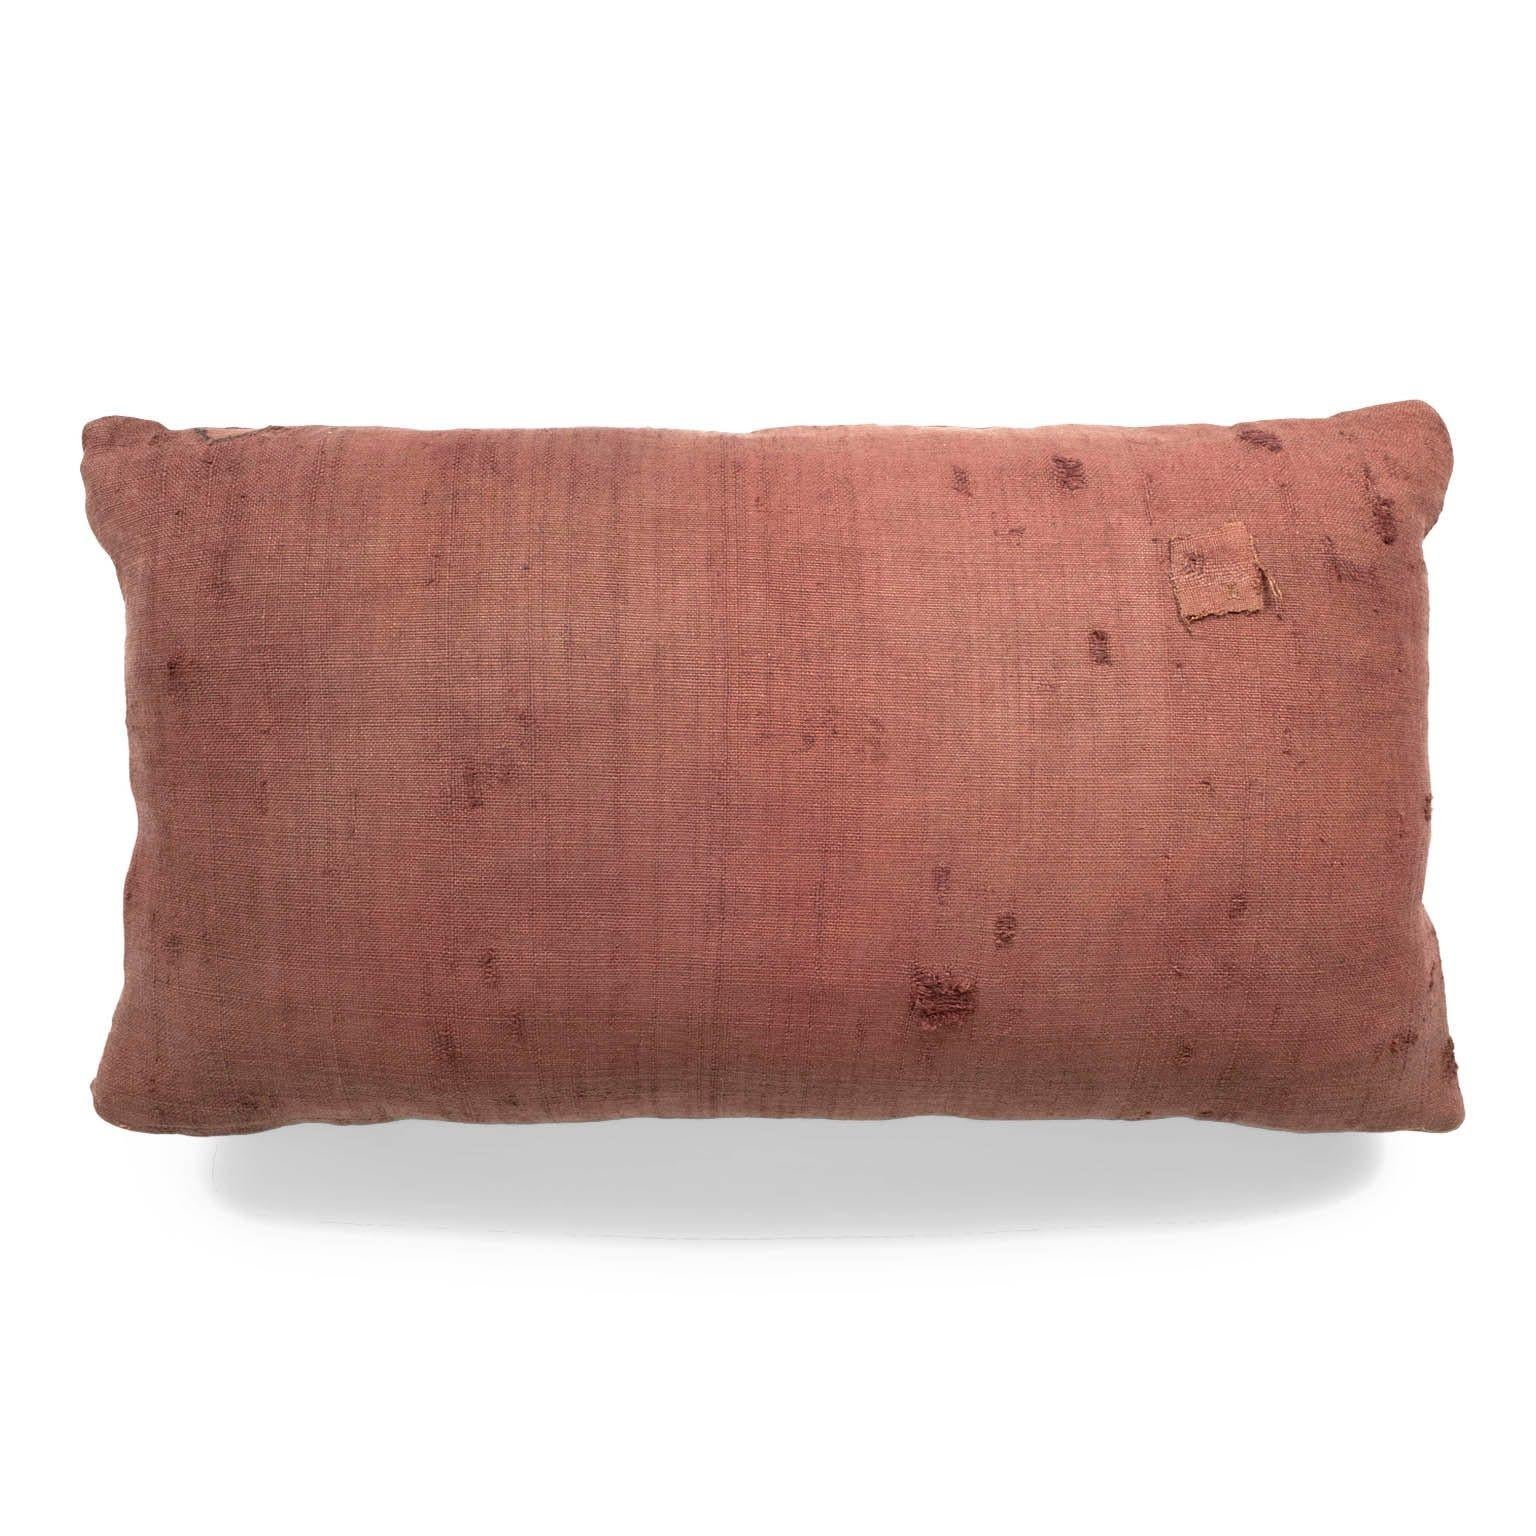 Tribal Faded Plum-Color Embroidered Lumbar Cushion For Sale